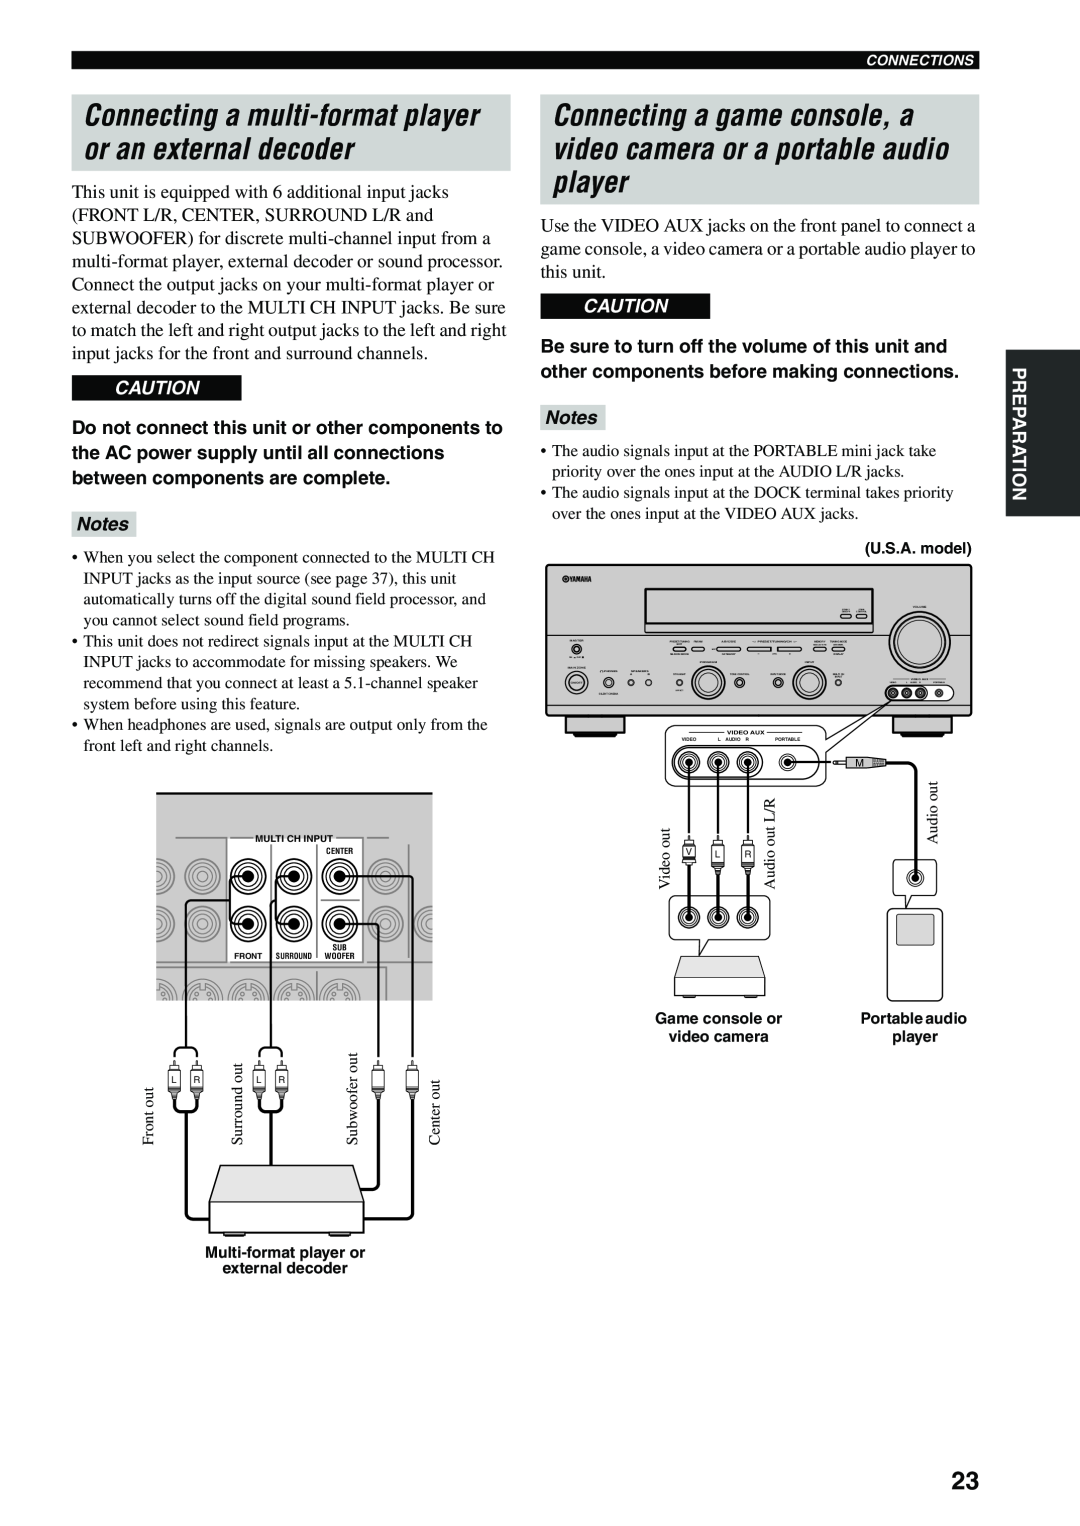 Yamaha RX-V559 owner manual Notes, out L/R, Audio out, Video, Multi-formatplayer or external decoder 